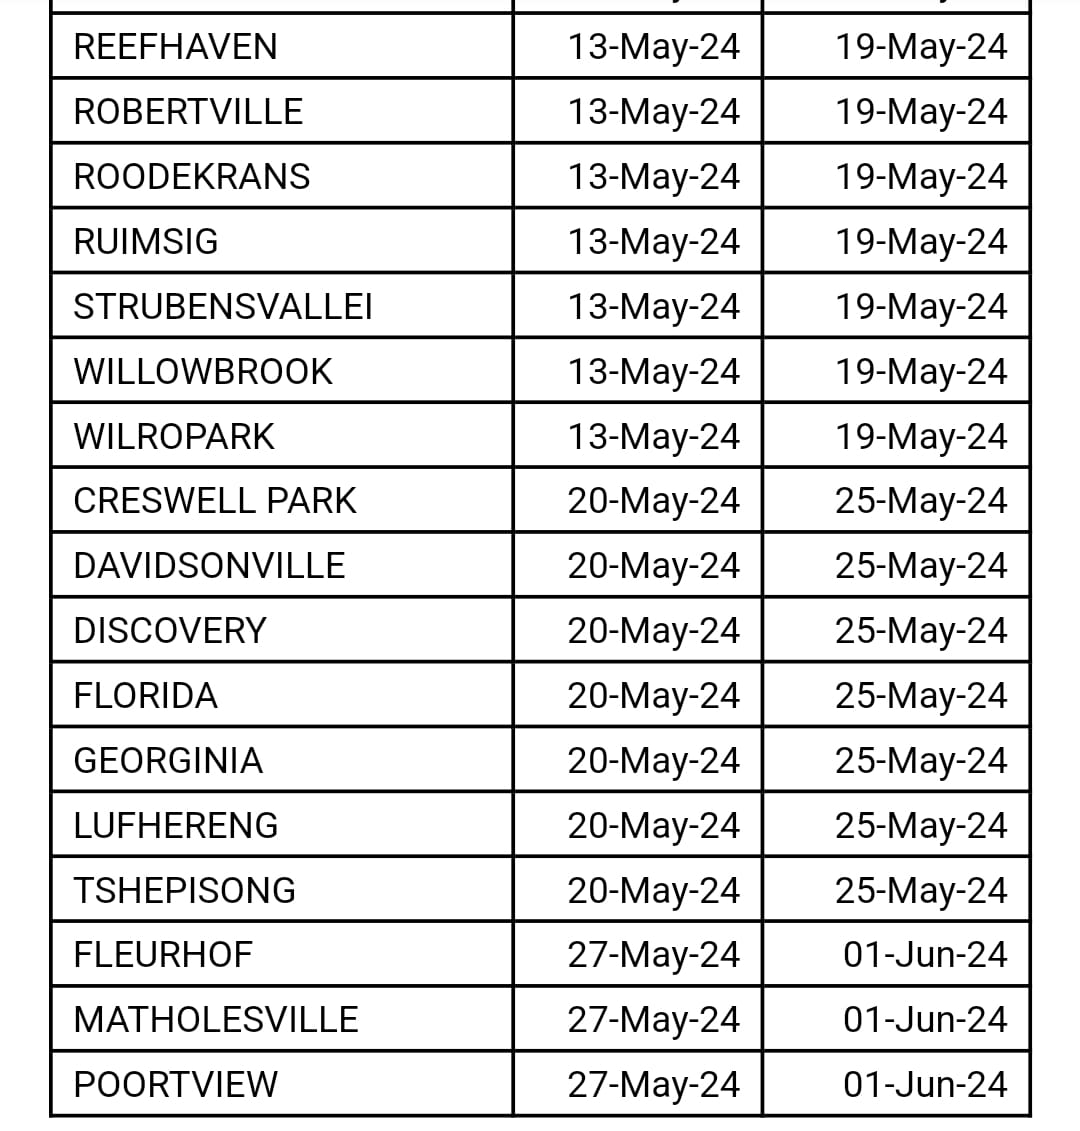 #CityPowerServices #RoodepoortSDC

Kindly find the TID schedule for the Roodepoort SDC.

👇Below are the areas & dates that our officials will visit certain suburbs. ^MR